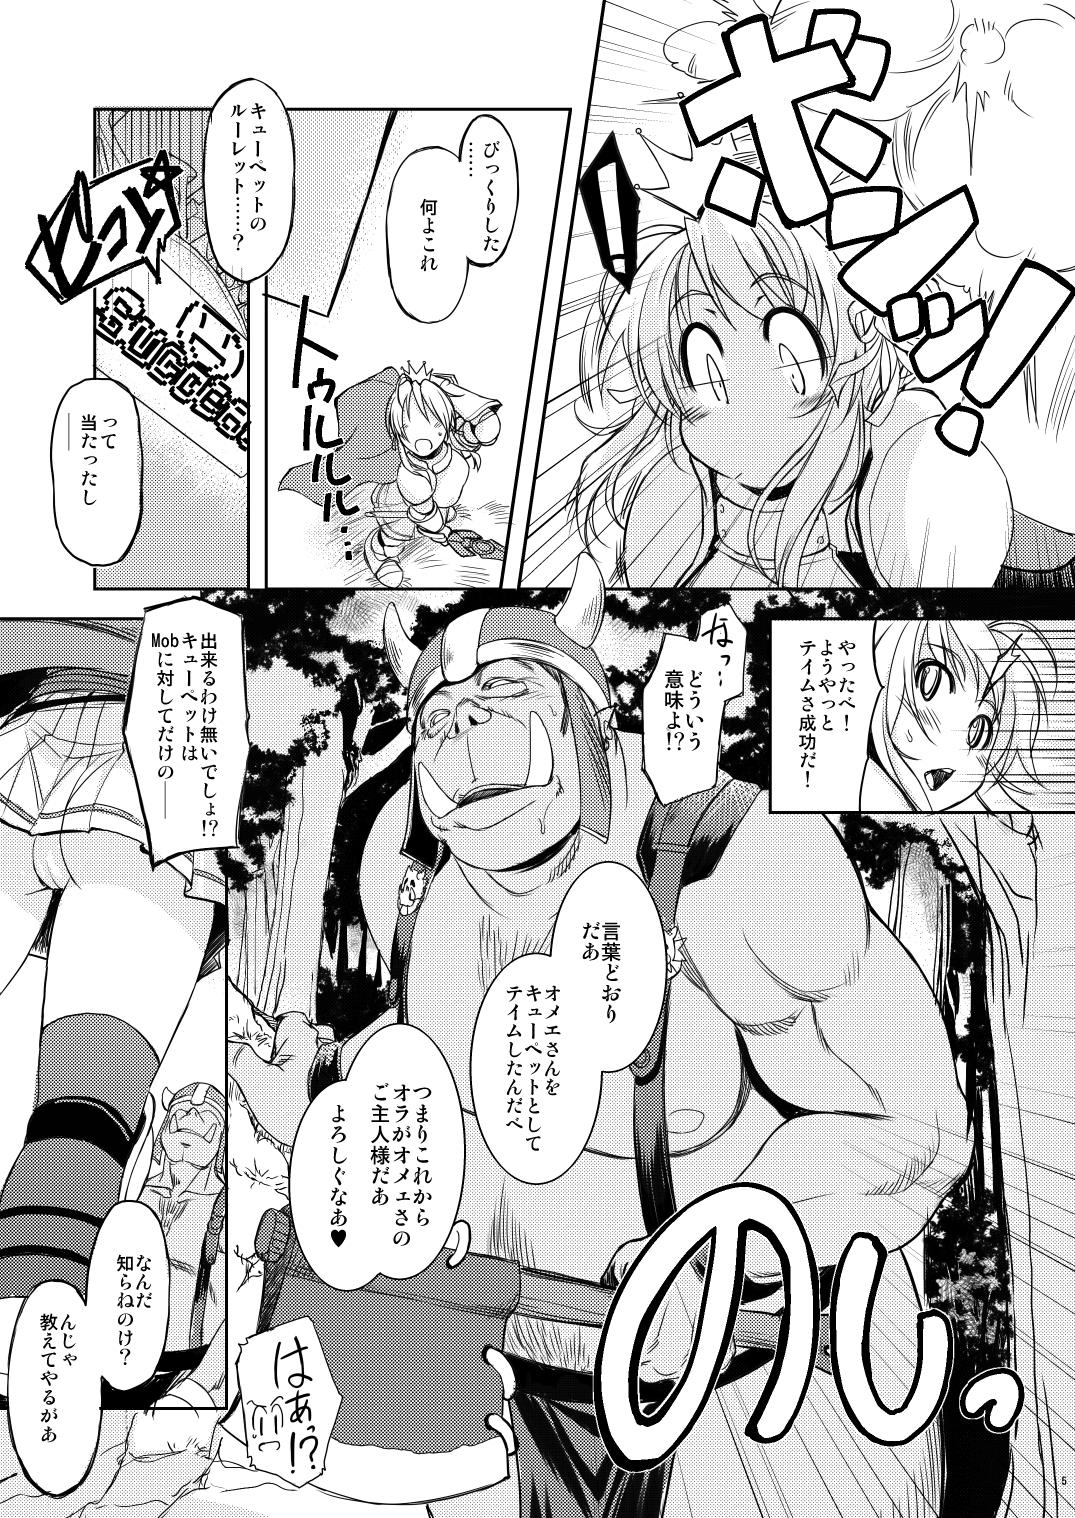 Clip Hime Kishi Tame 1 - Ragnarok online With - Page 4